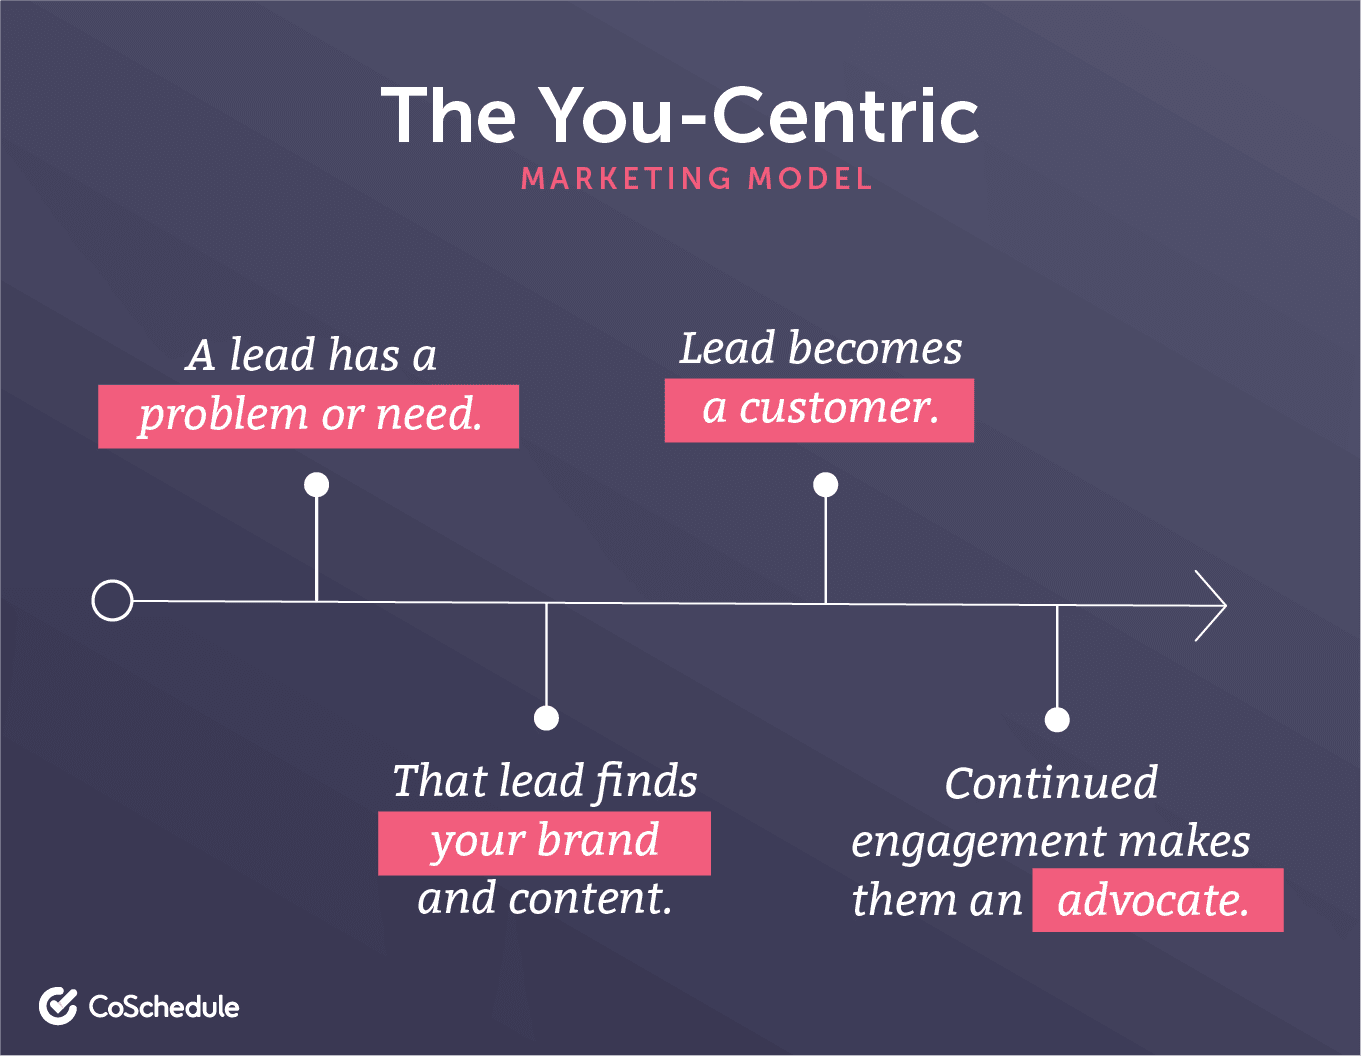 Example of the you-centric marketing model